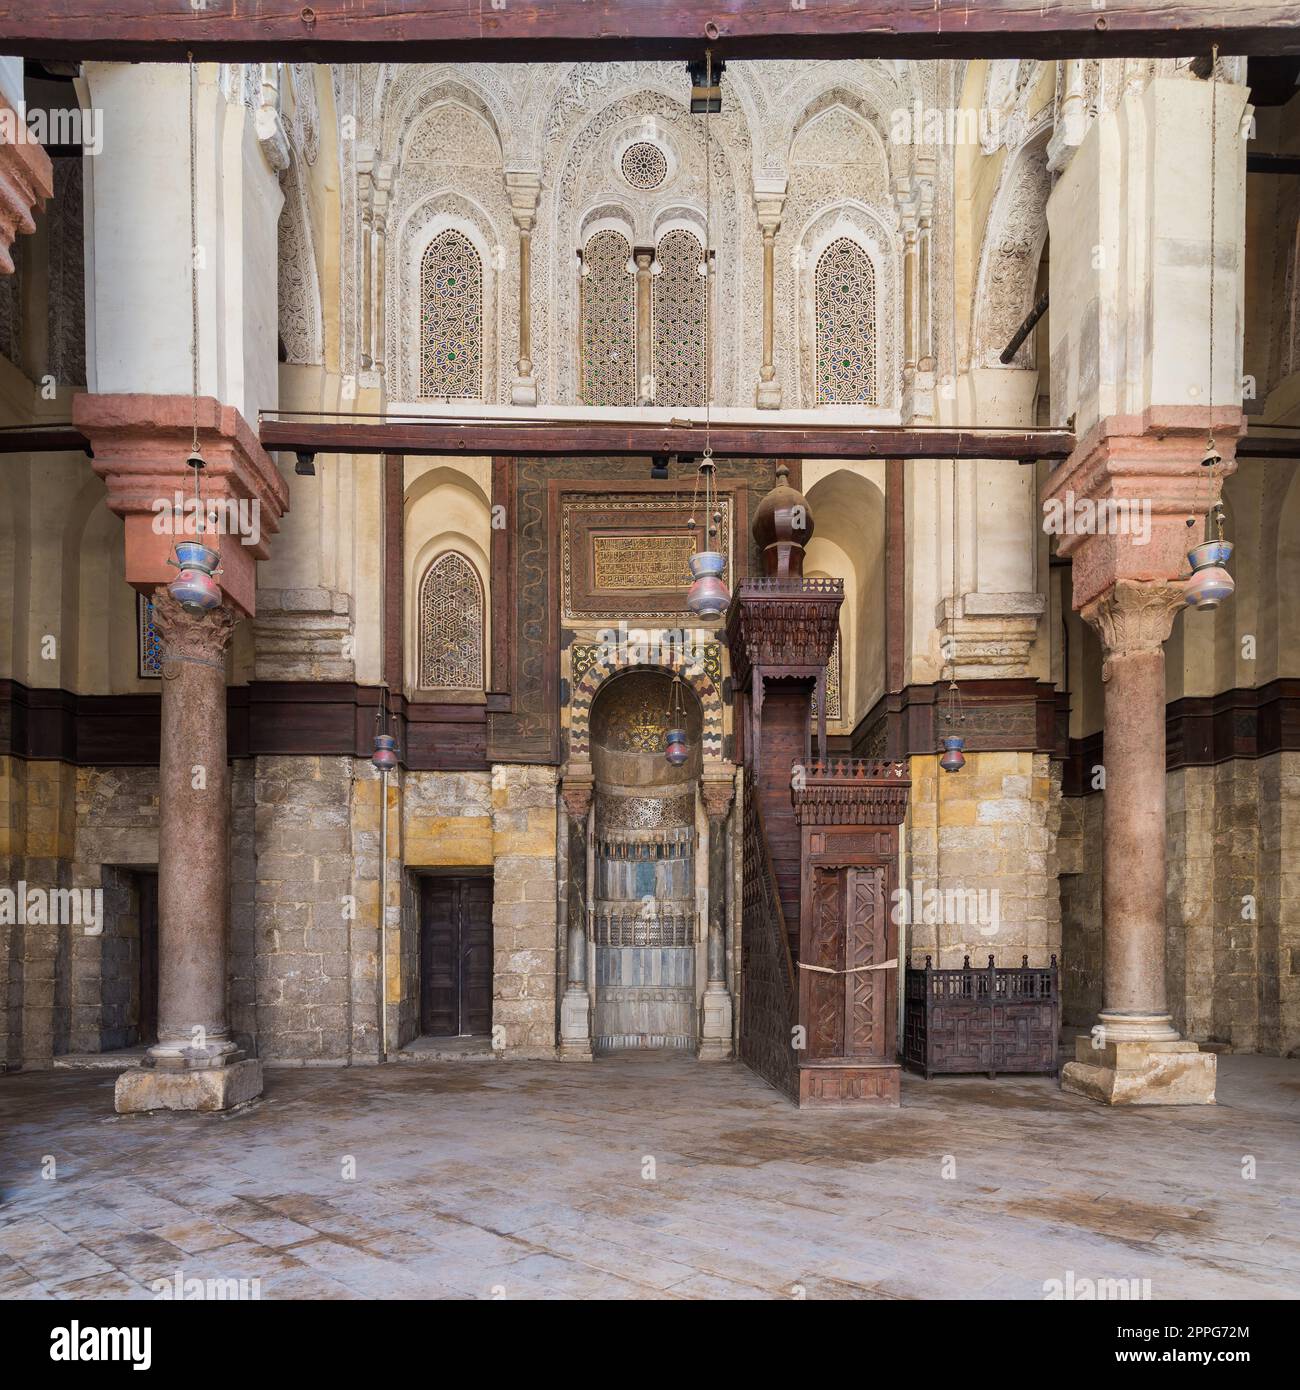 Niche - Mihrab - and pulpit - Minbar - of Mosque of Sultan Qalawun, Old Cairo, Egypt Stock Photo